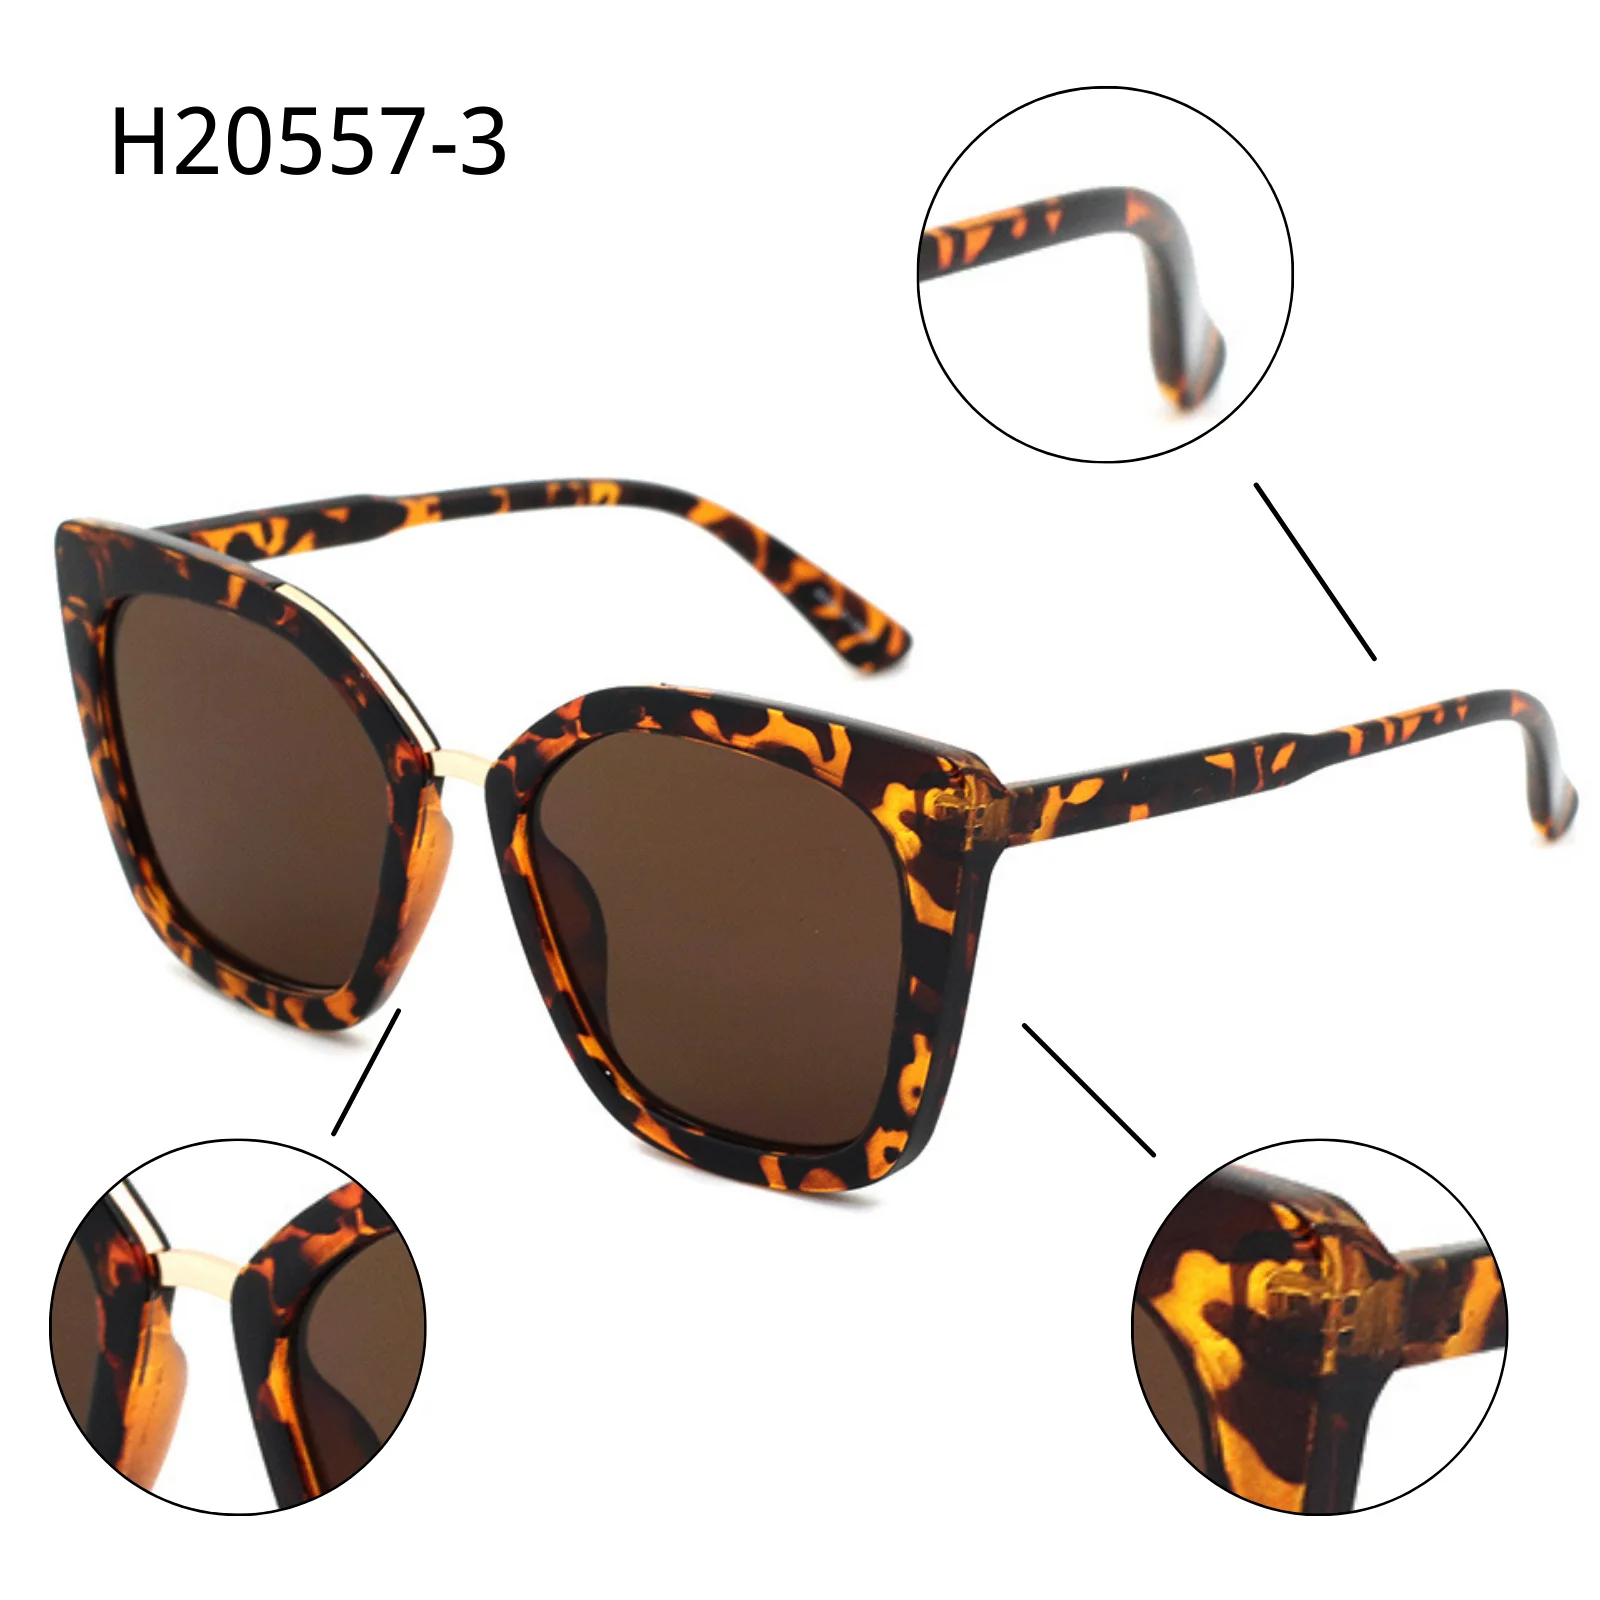 

VIFF HP20557 Vintage Big Frame Sun Glasses River Hot Amazon Seller Chinese Manufacturer Women Tortoiseshell Oversized Sunglasses, Multy and can be customized